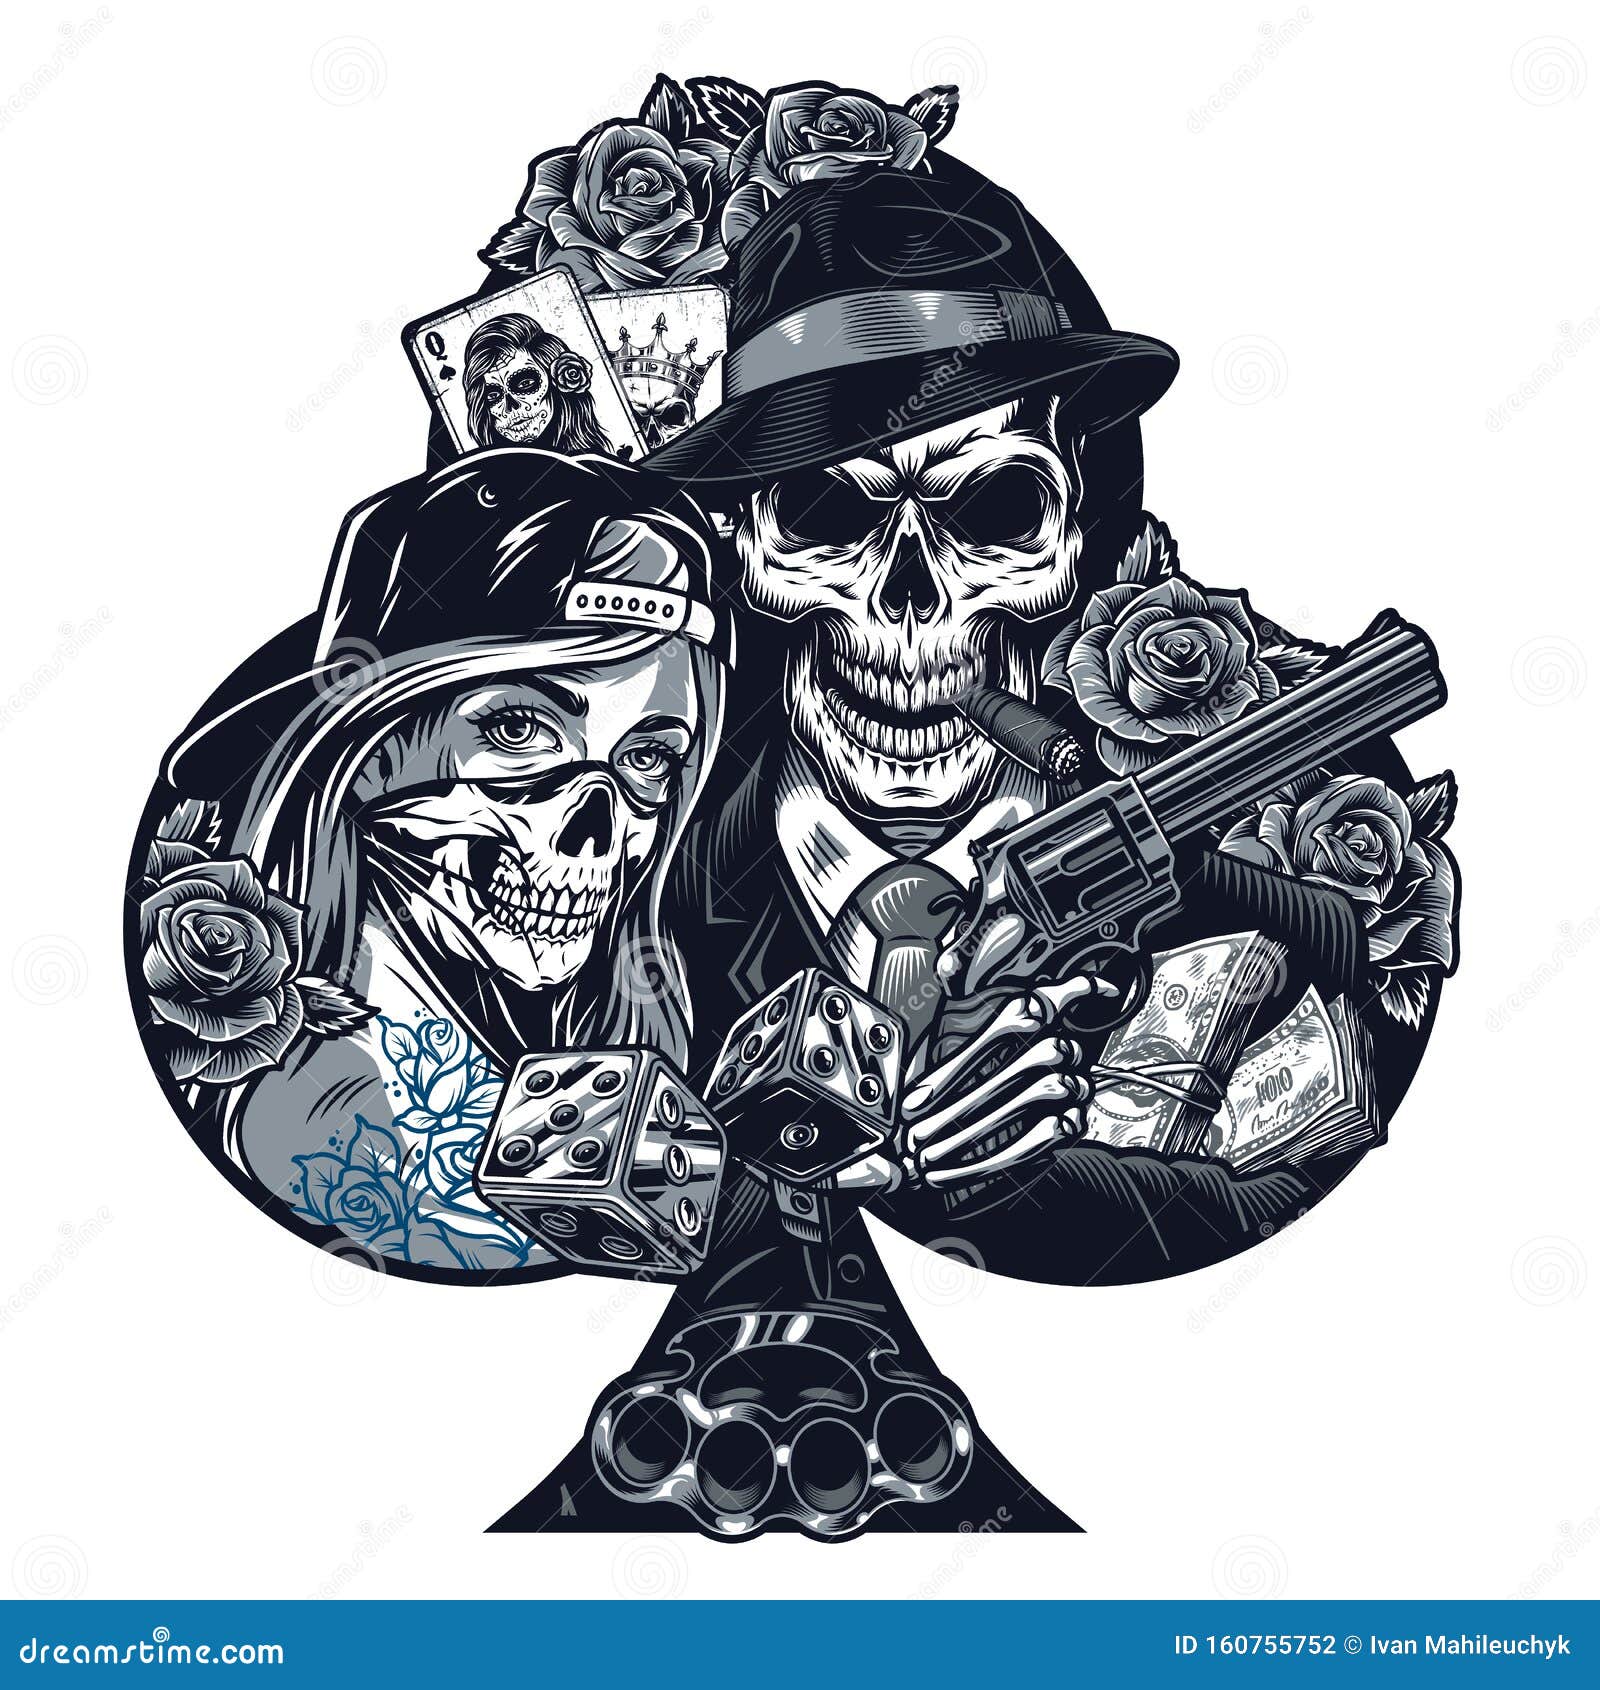 781 Chicano Tattoo Images Stock Photos  Vectors  Shutterstock